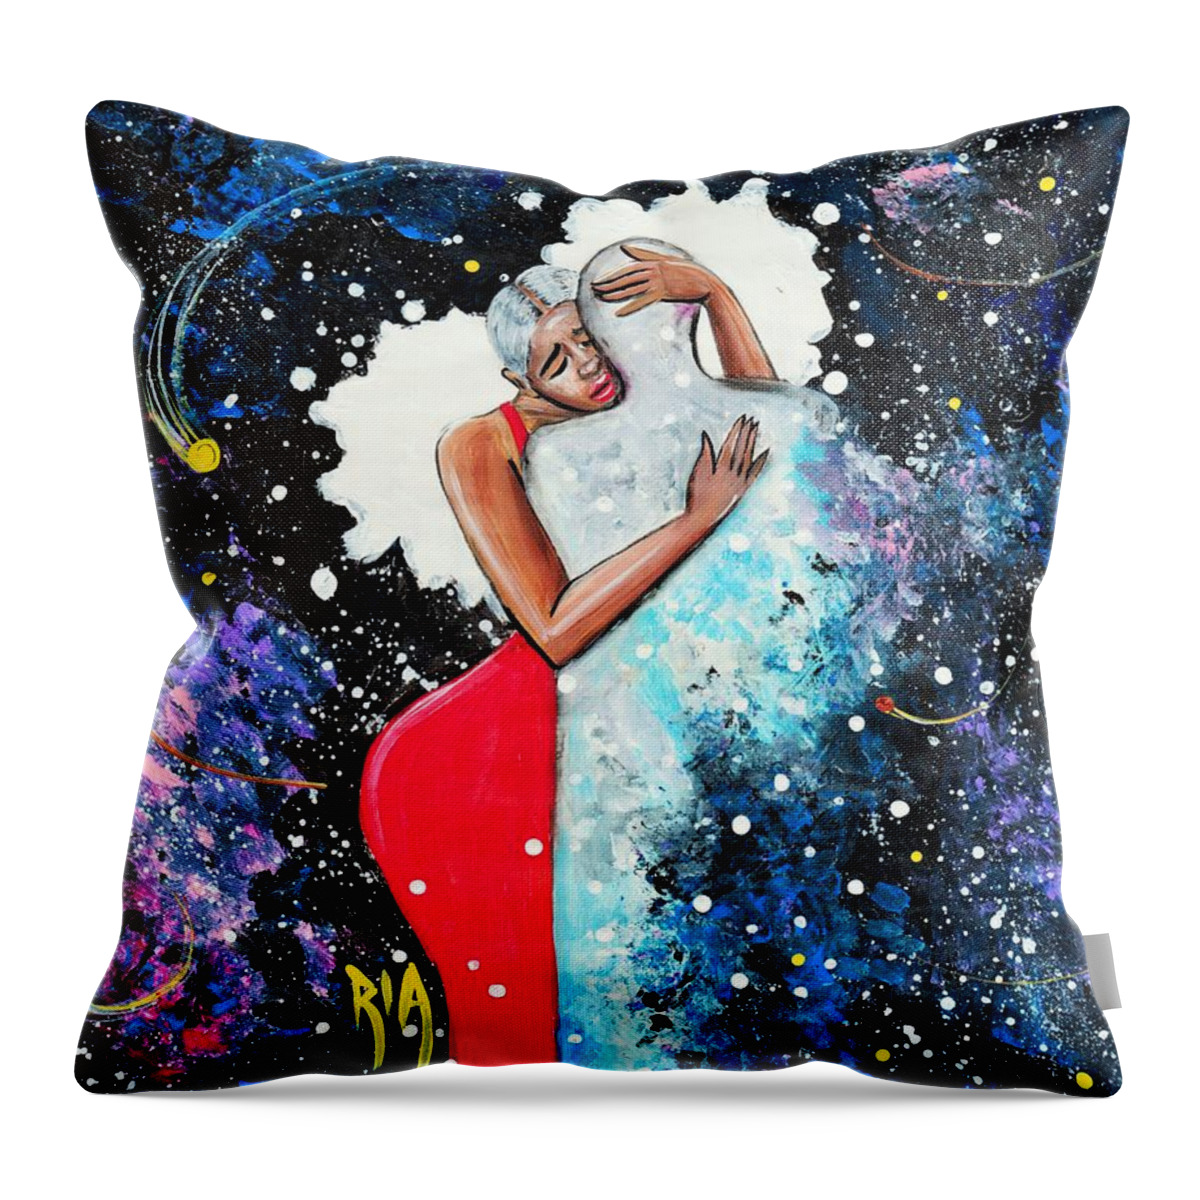 Love Throw Pillow featuring the painting Light Years For Love by Artist RiA